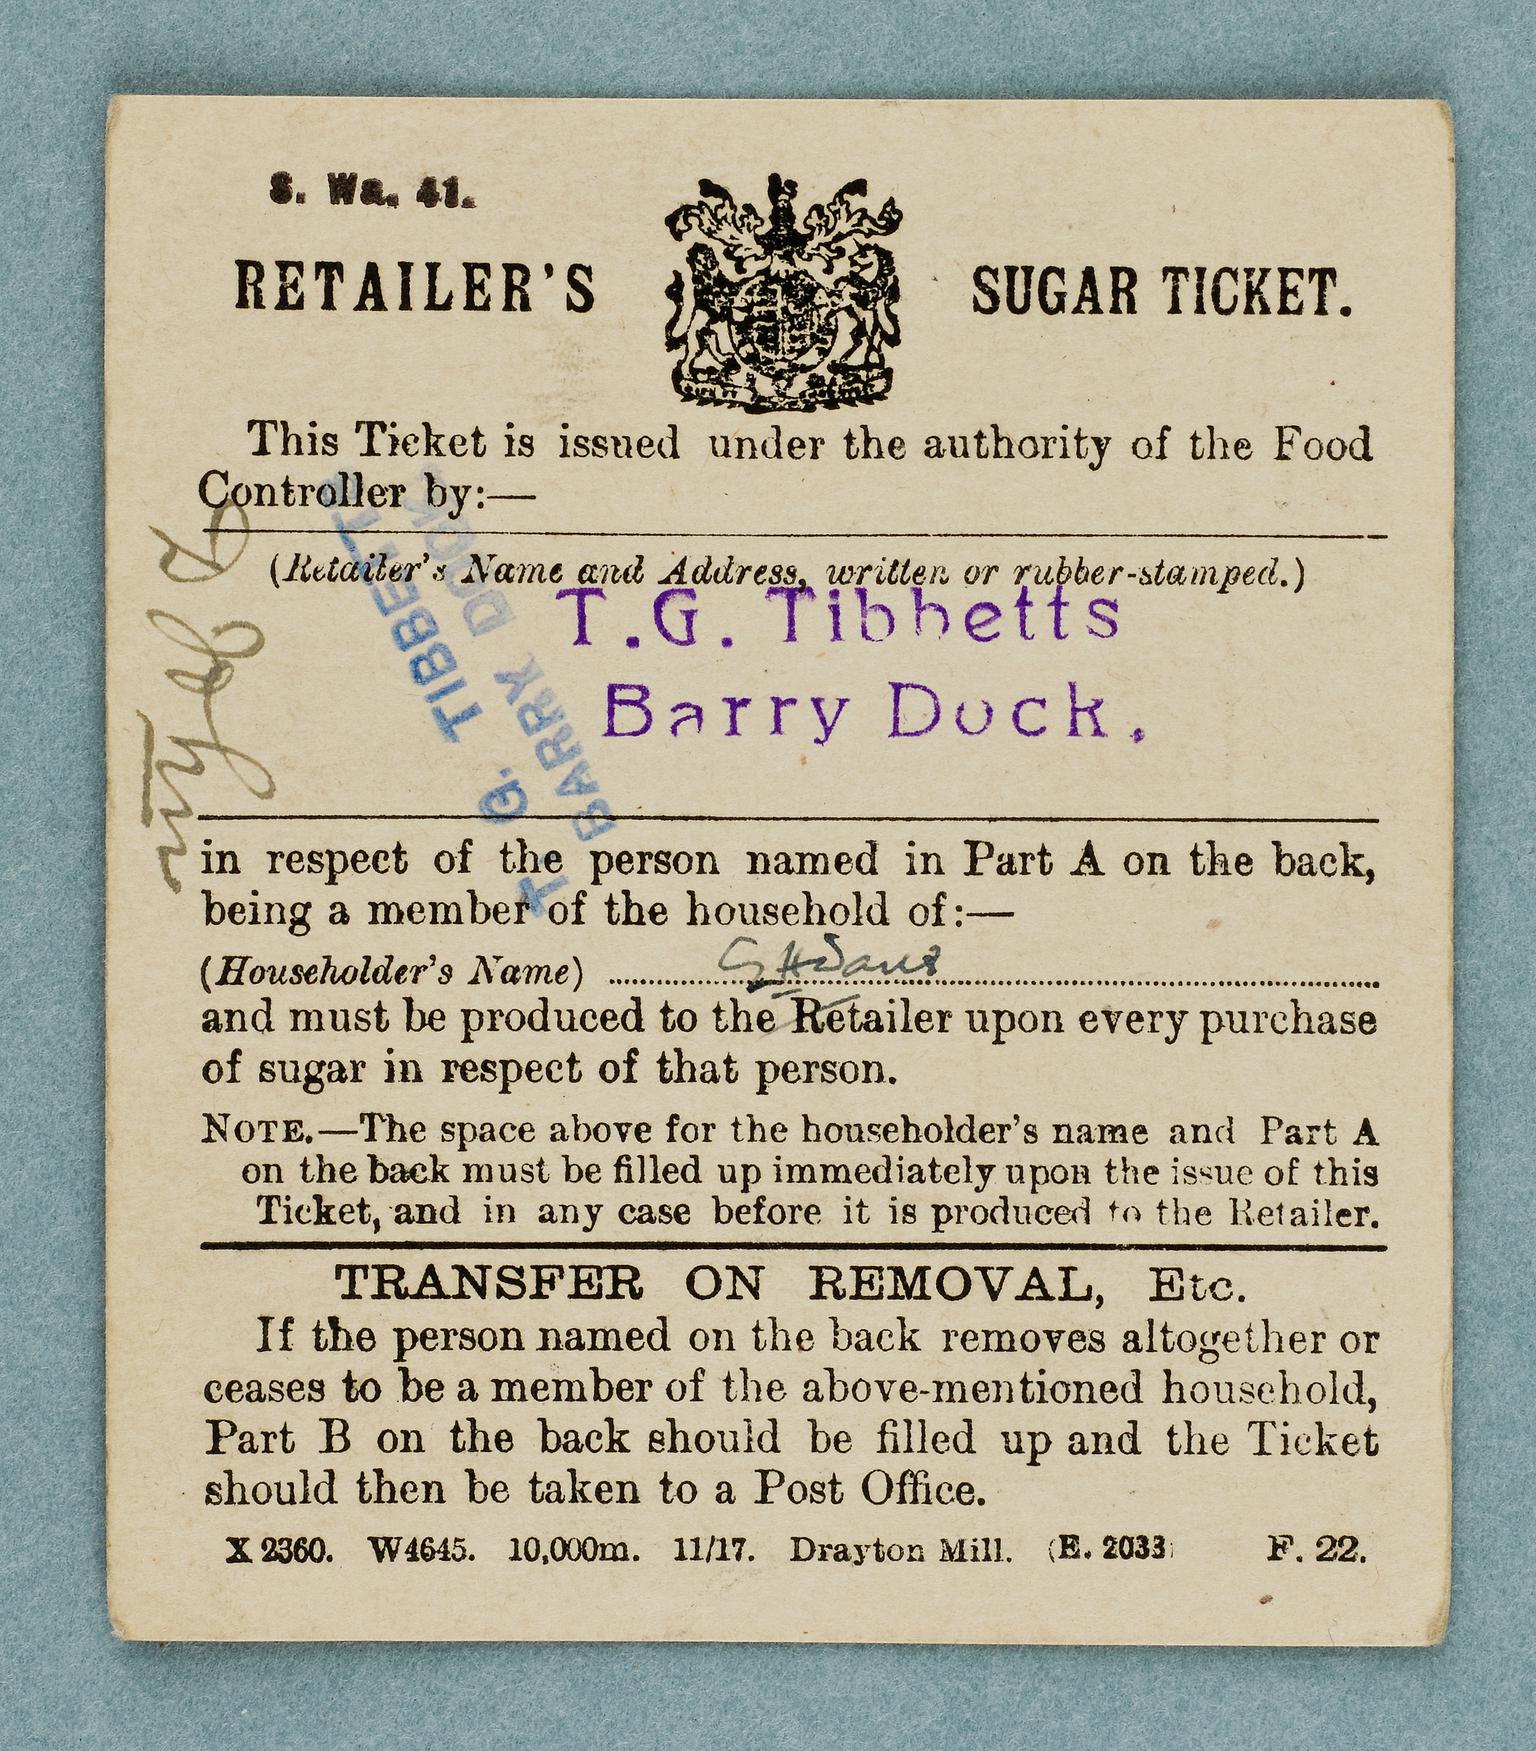 Ration book/card